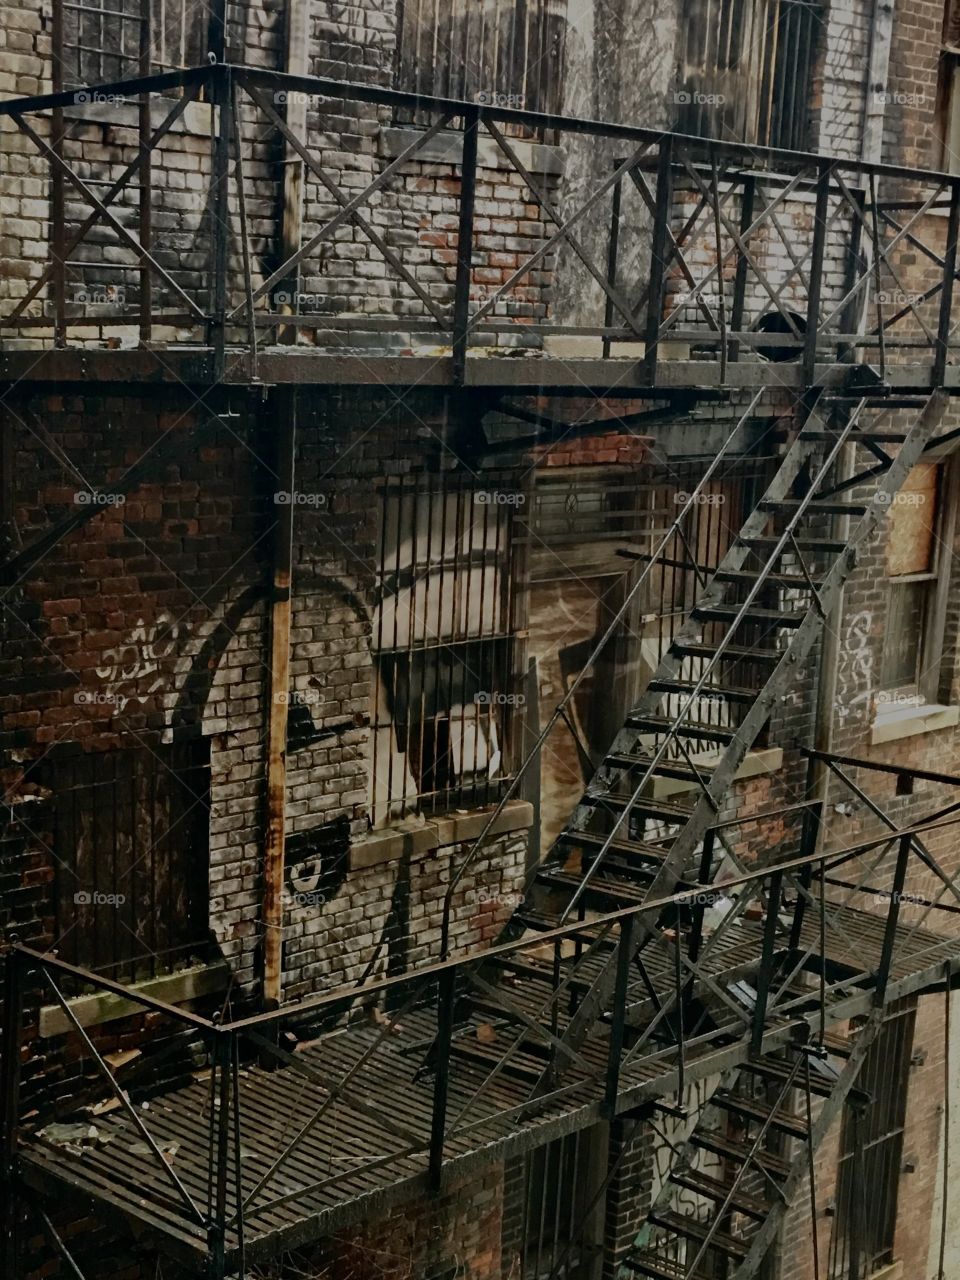 The interesting character of a Detroit alley and fire escapes 